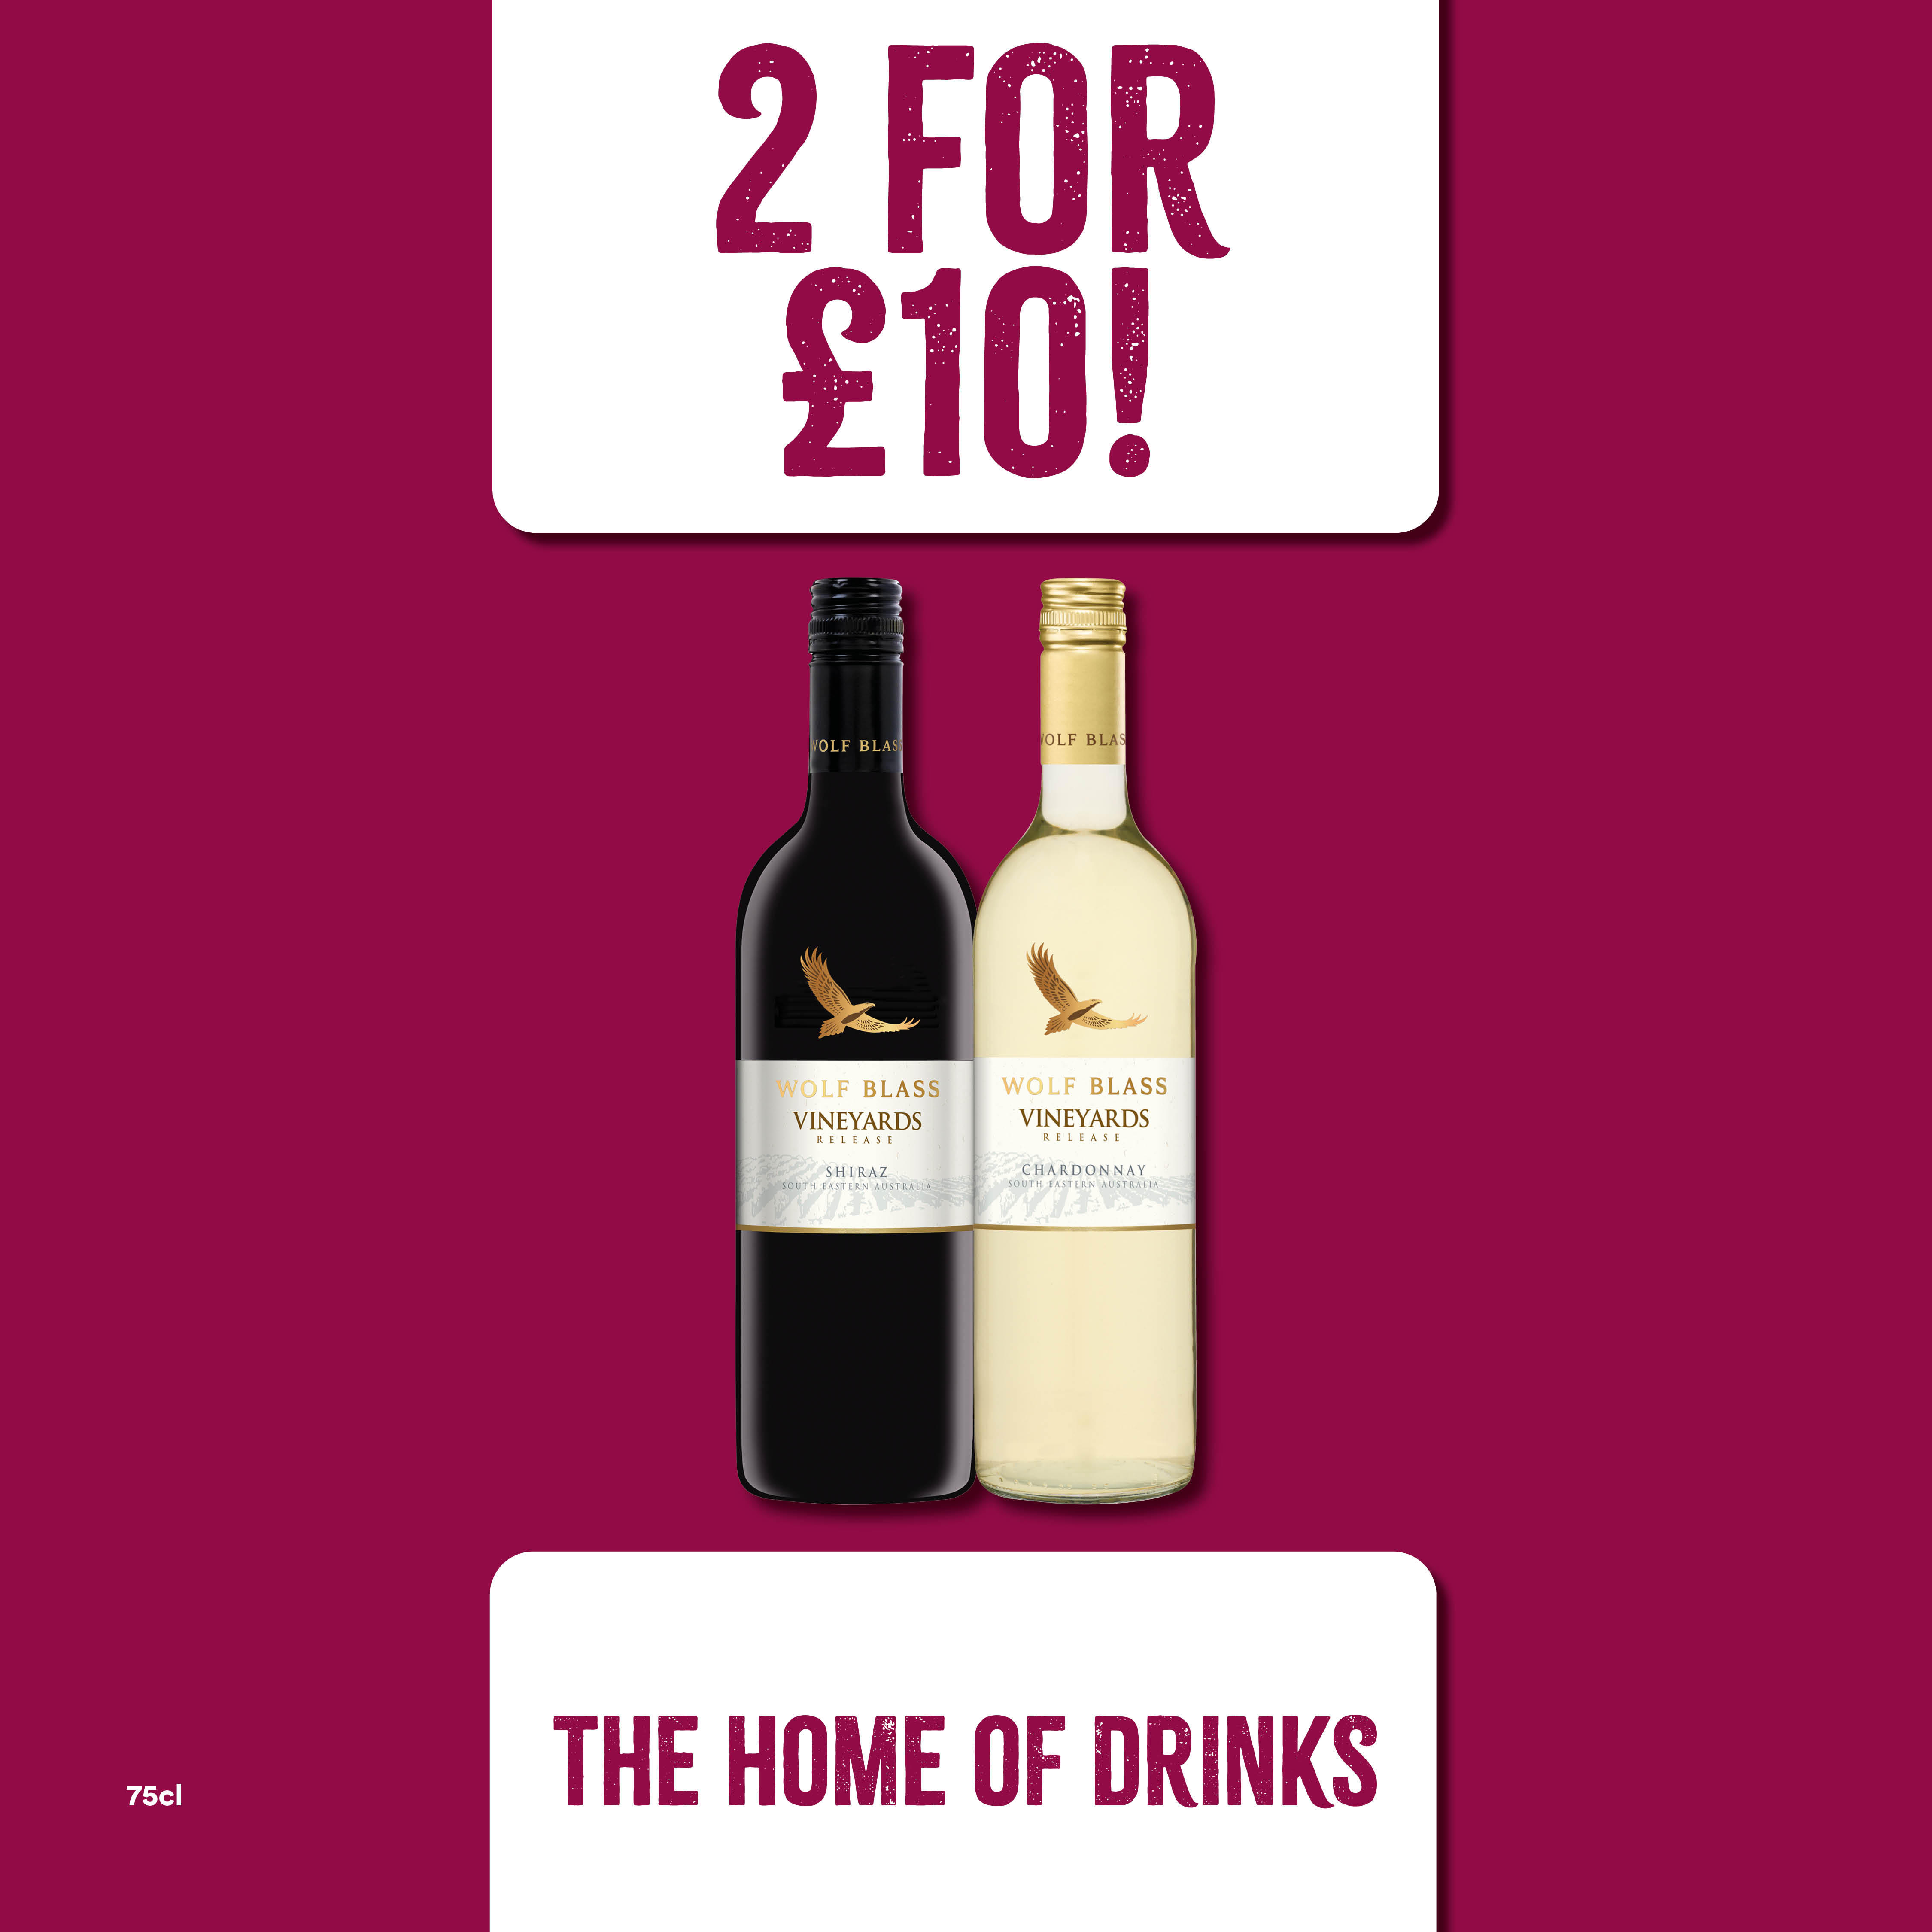 2 for £10 Wolfblass vineyards Bargain Booze Select Convenience Leicester 01162 302553